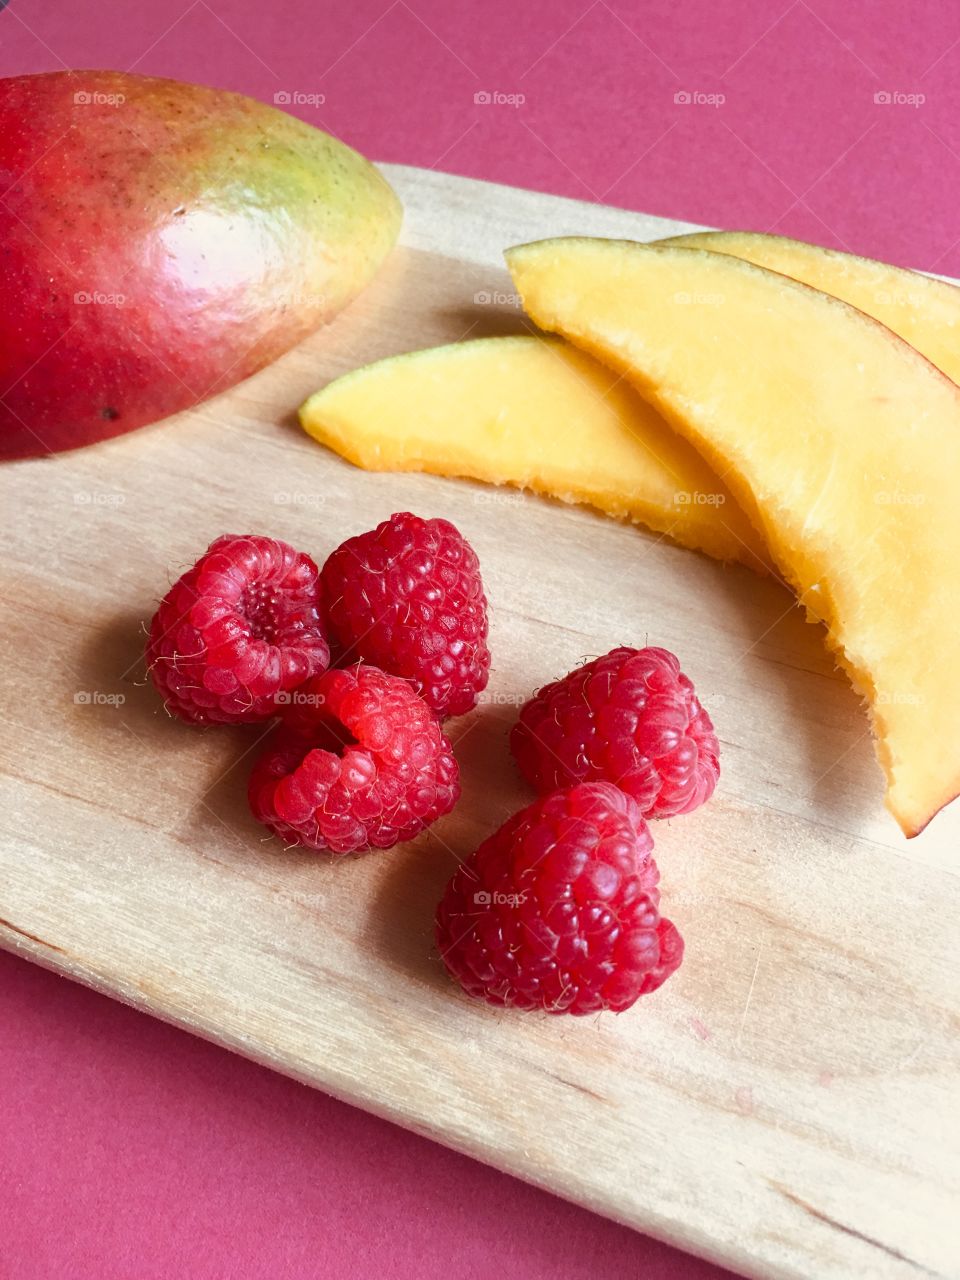 Fresh raspberries and mango slices on a wooden cutting board